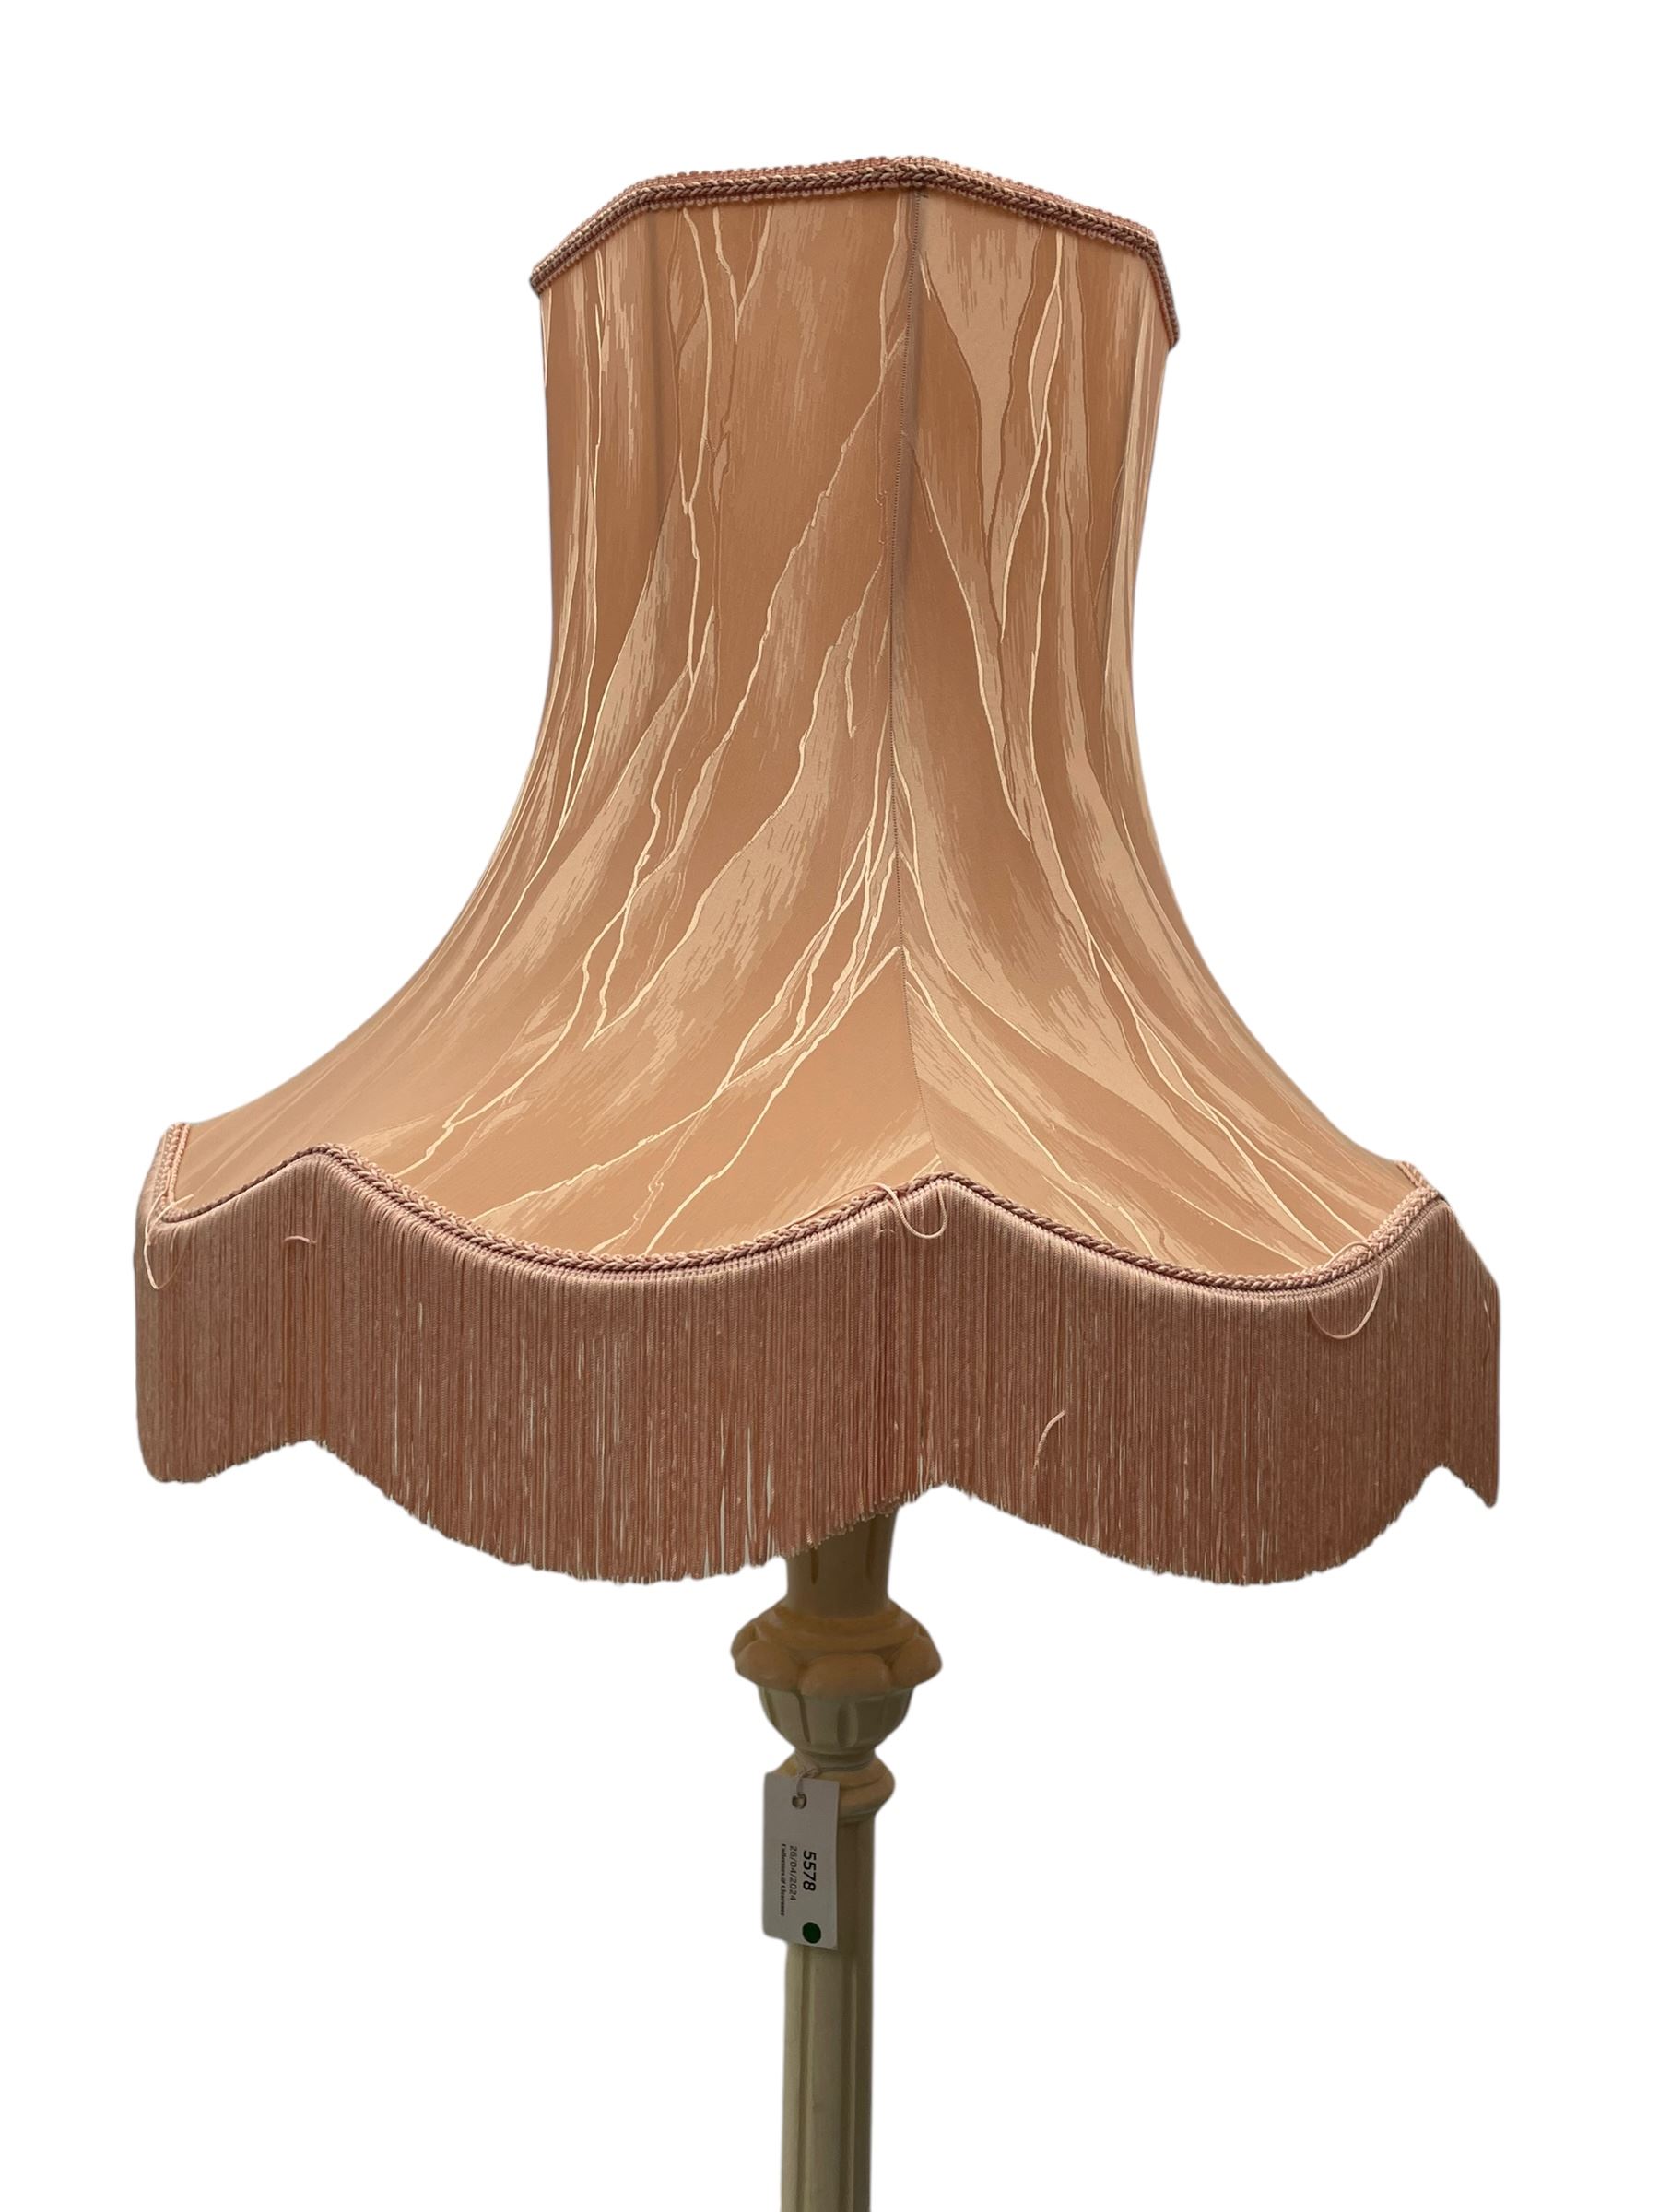 Cream painted standard lamp with shade - Image 3 of 3